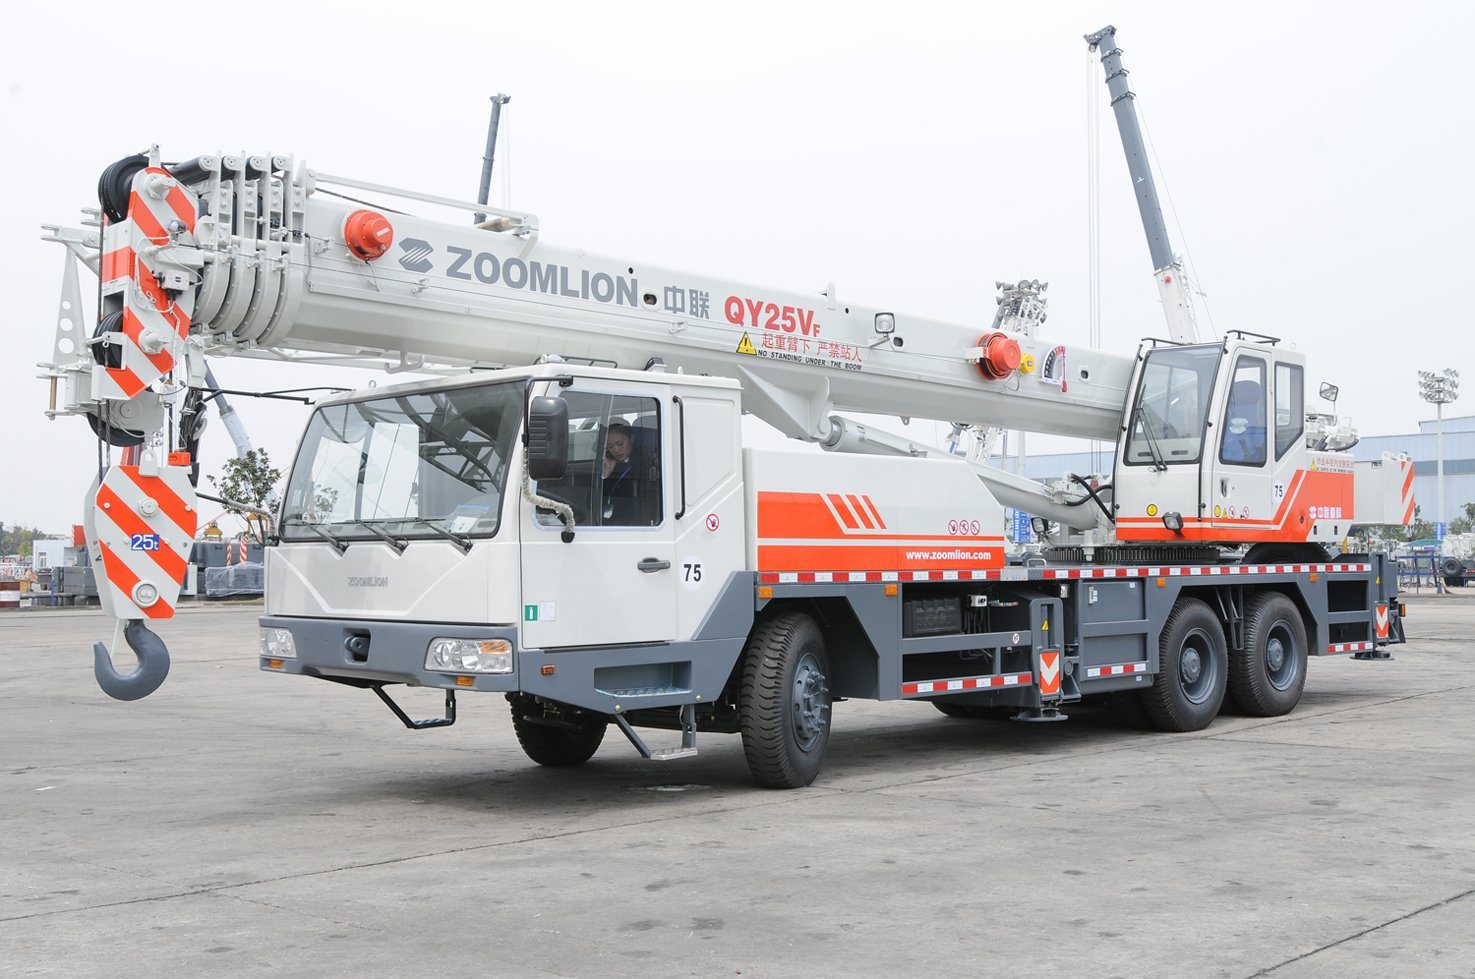 High Quality Popular Machinery Zoomlion 25 Ton Mobile Truck Crane Qy25V552 for Sale